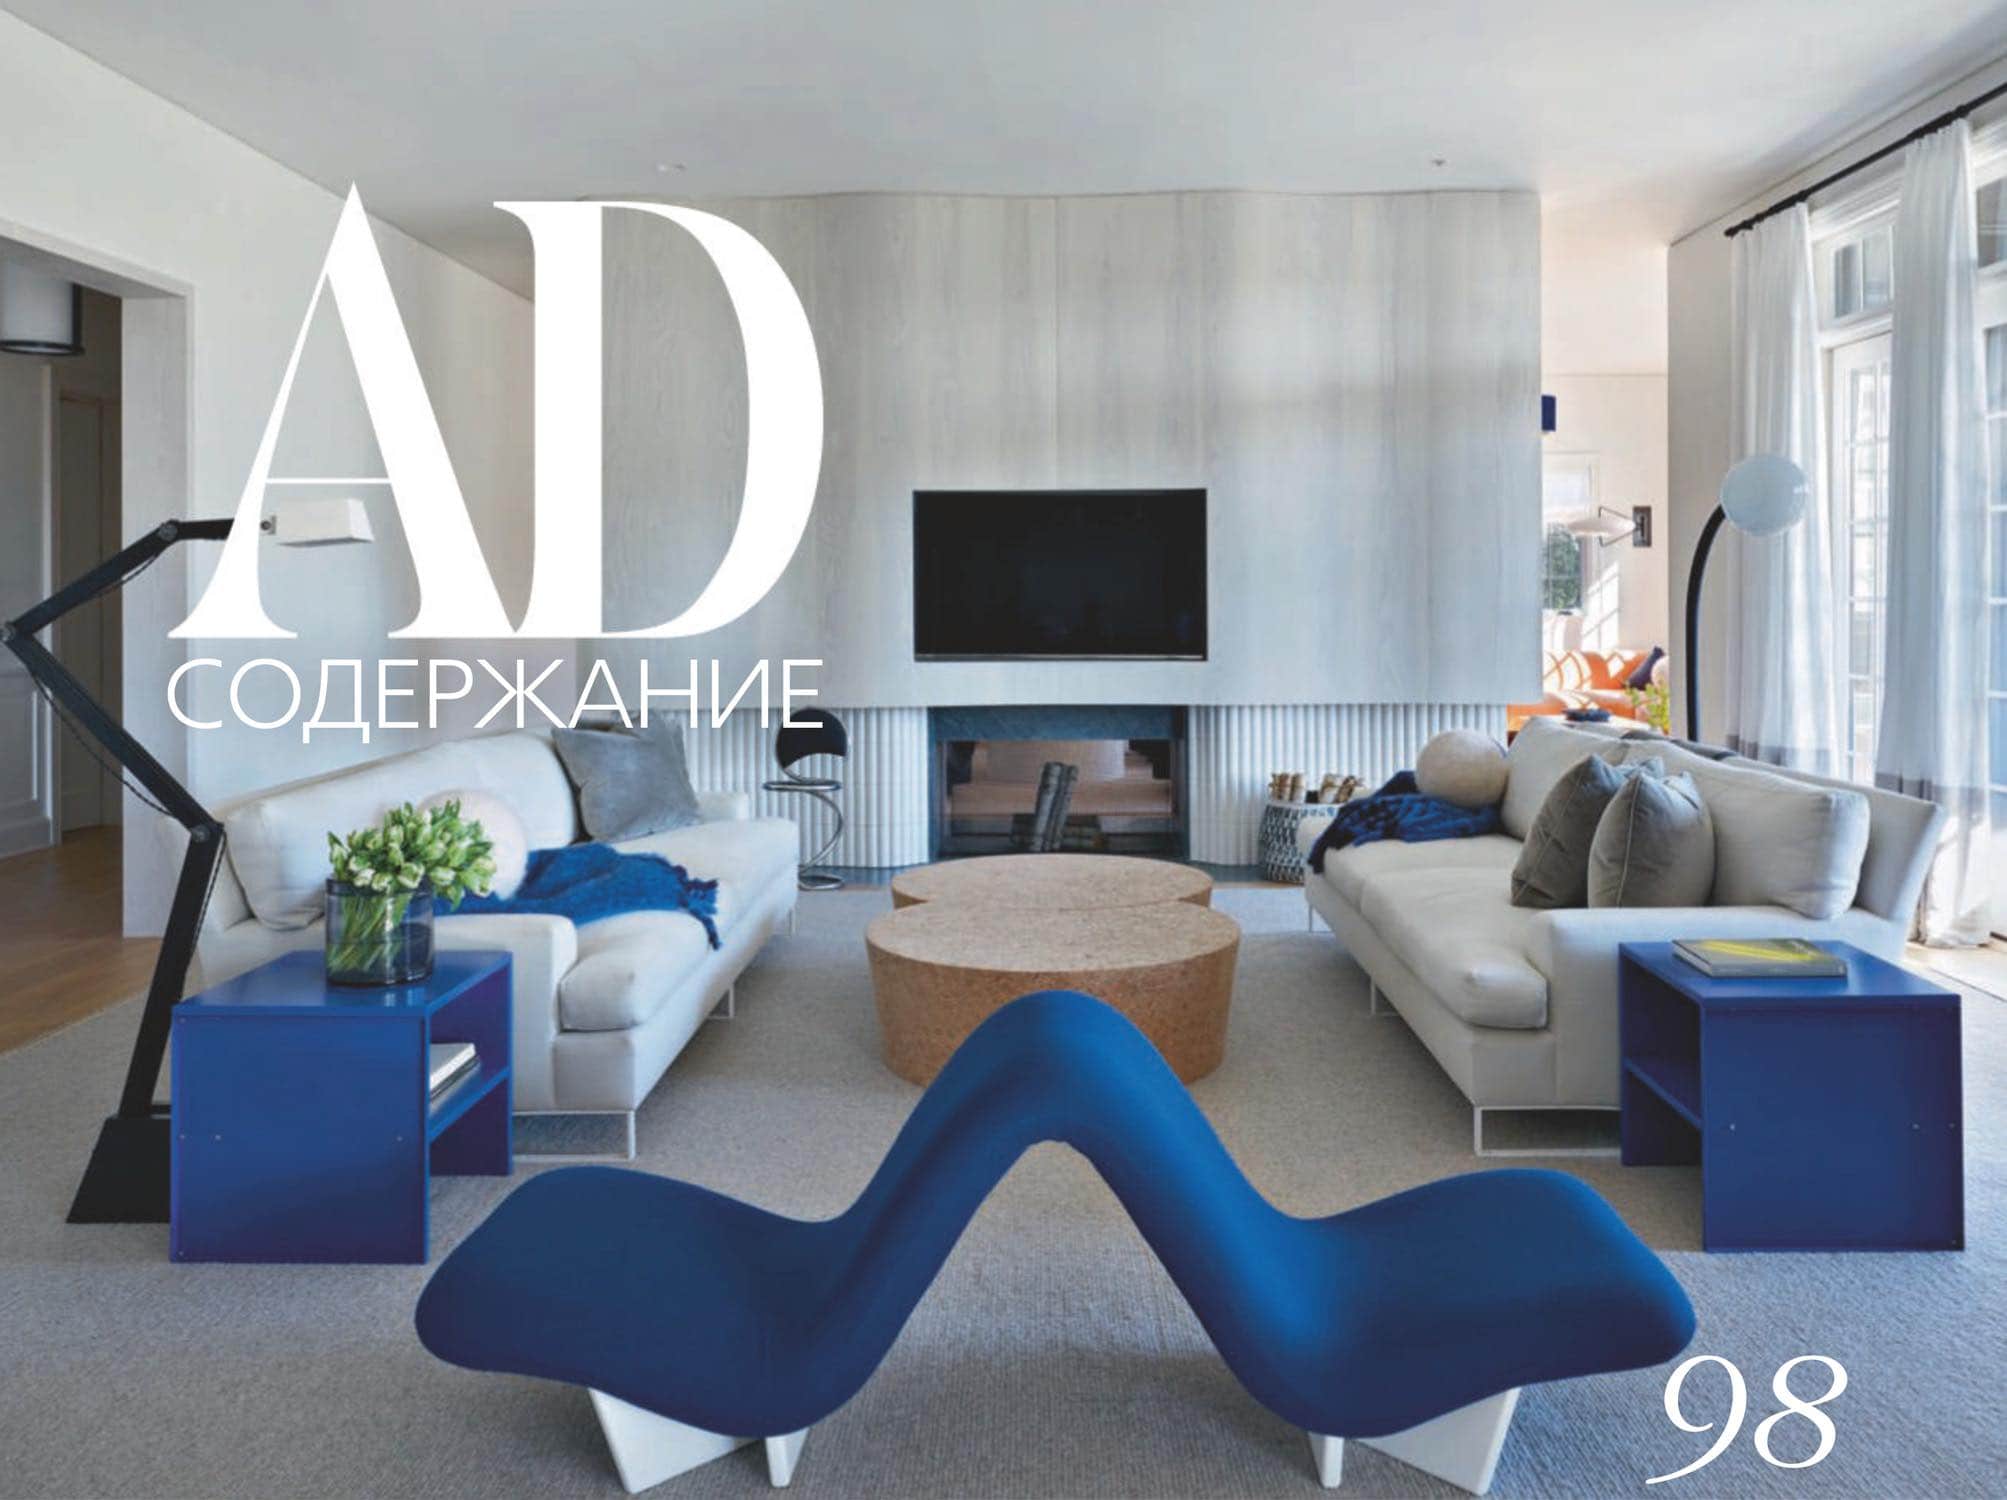 Living room in Sagaponack residence designed by Carol Egan Interiors.  Furniture include Dos a Dos banquette by Pierre Paulin, side tables by Donald Judd, raffles sofa by Vico Magistretti and custom cork series coffee table by Jasper Morrison.